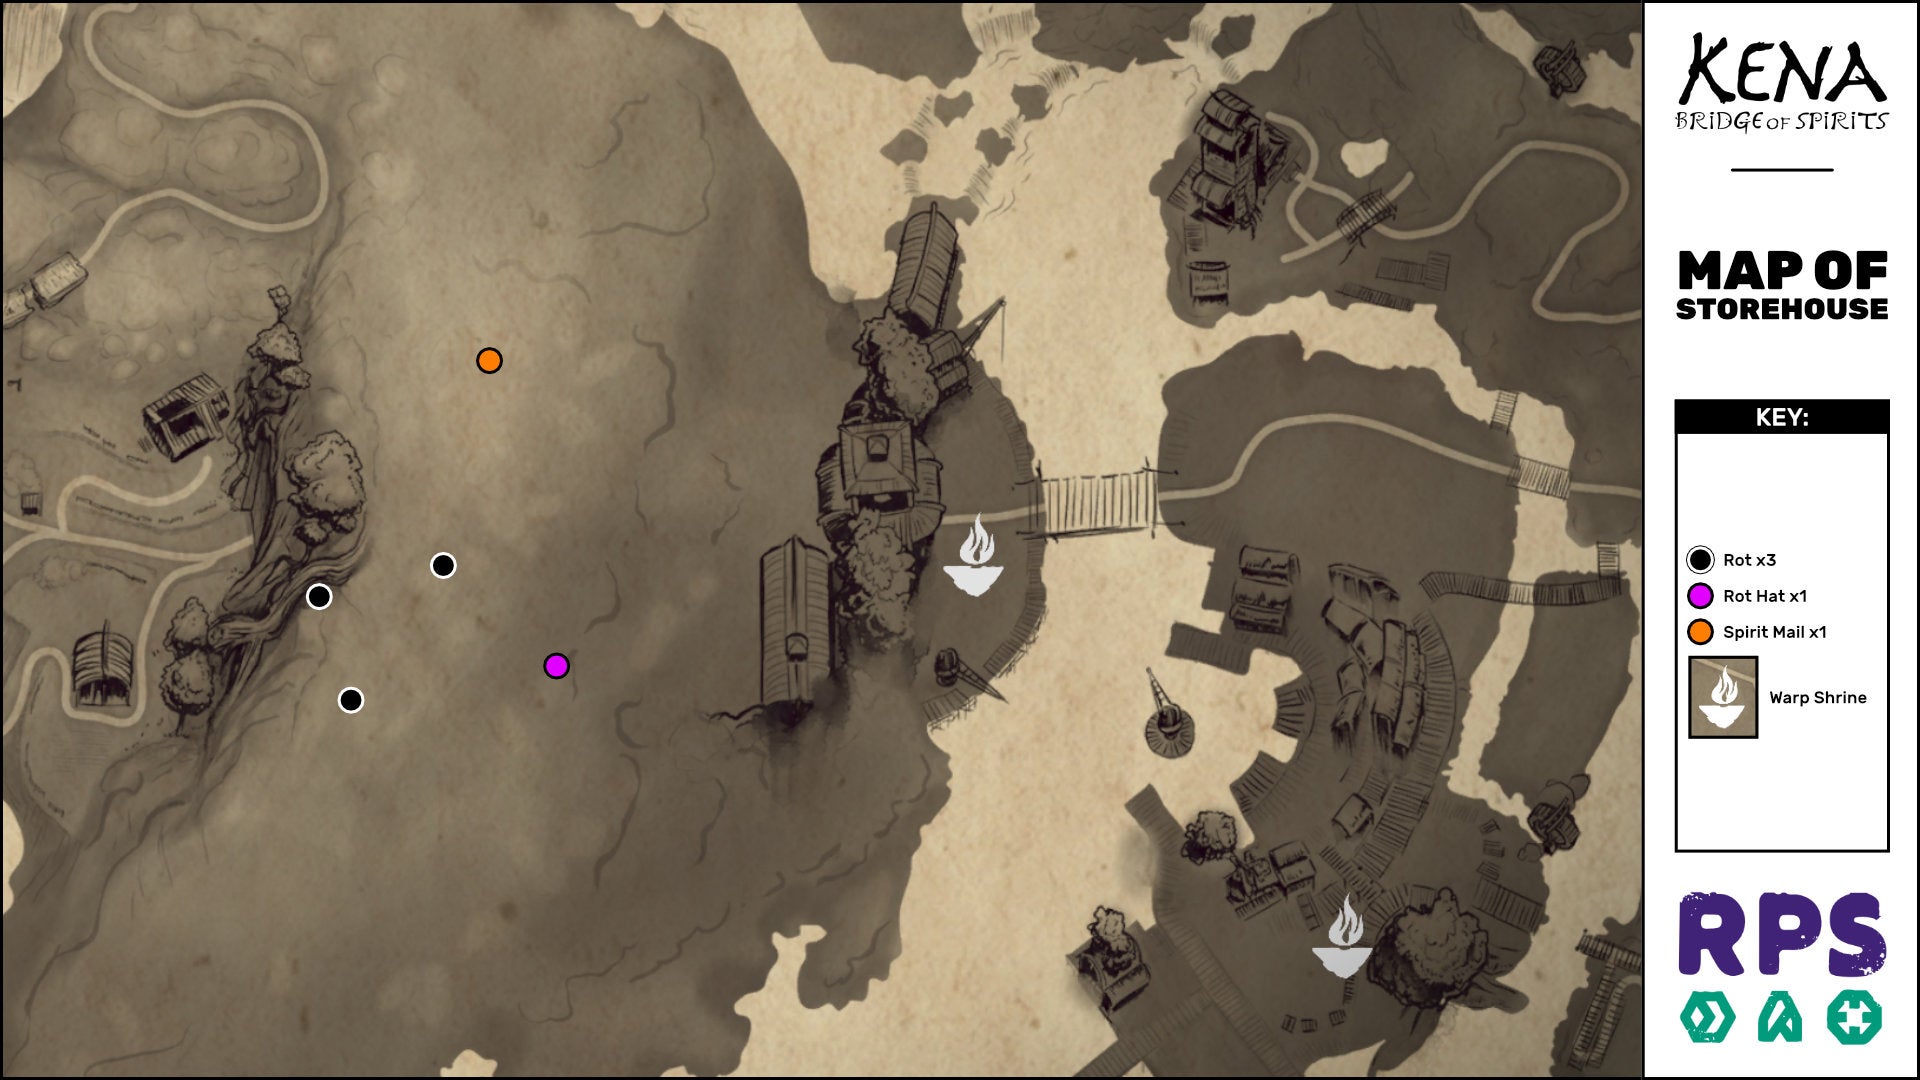 A map of the Storehouse area of Kena: Bridge Of Spirits with all collectible locations marked.